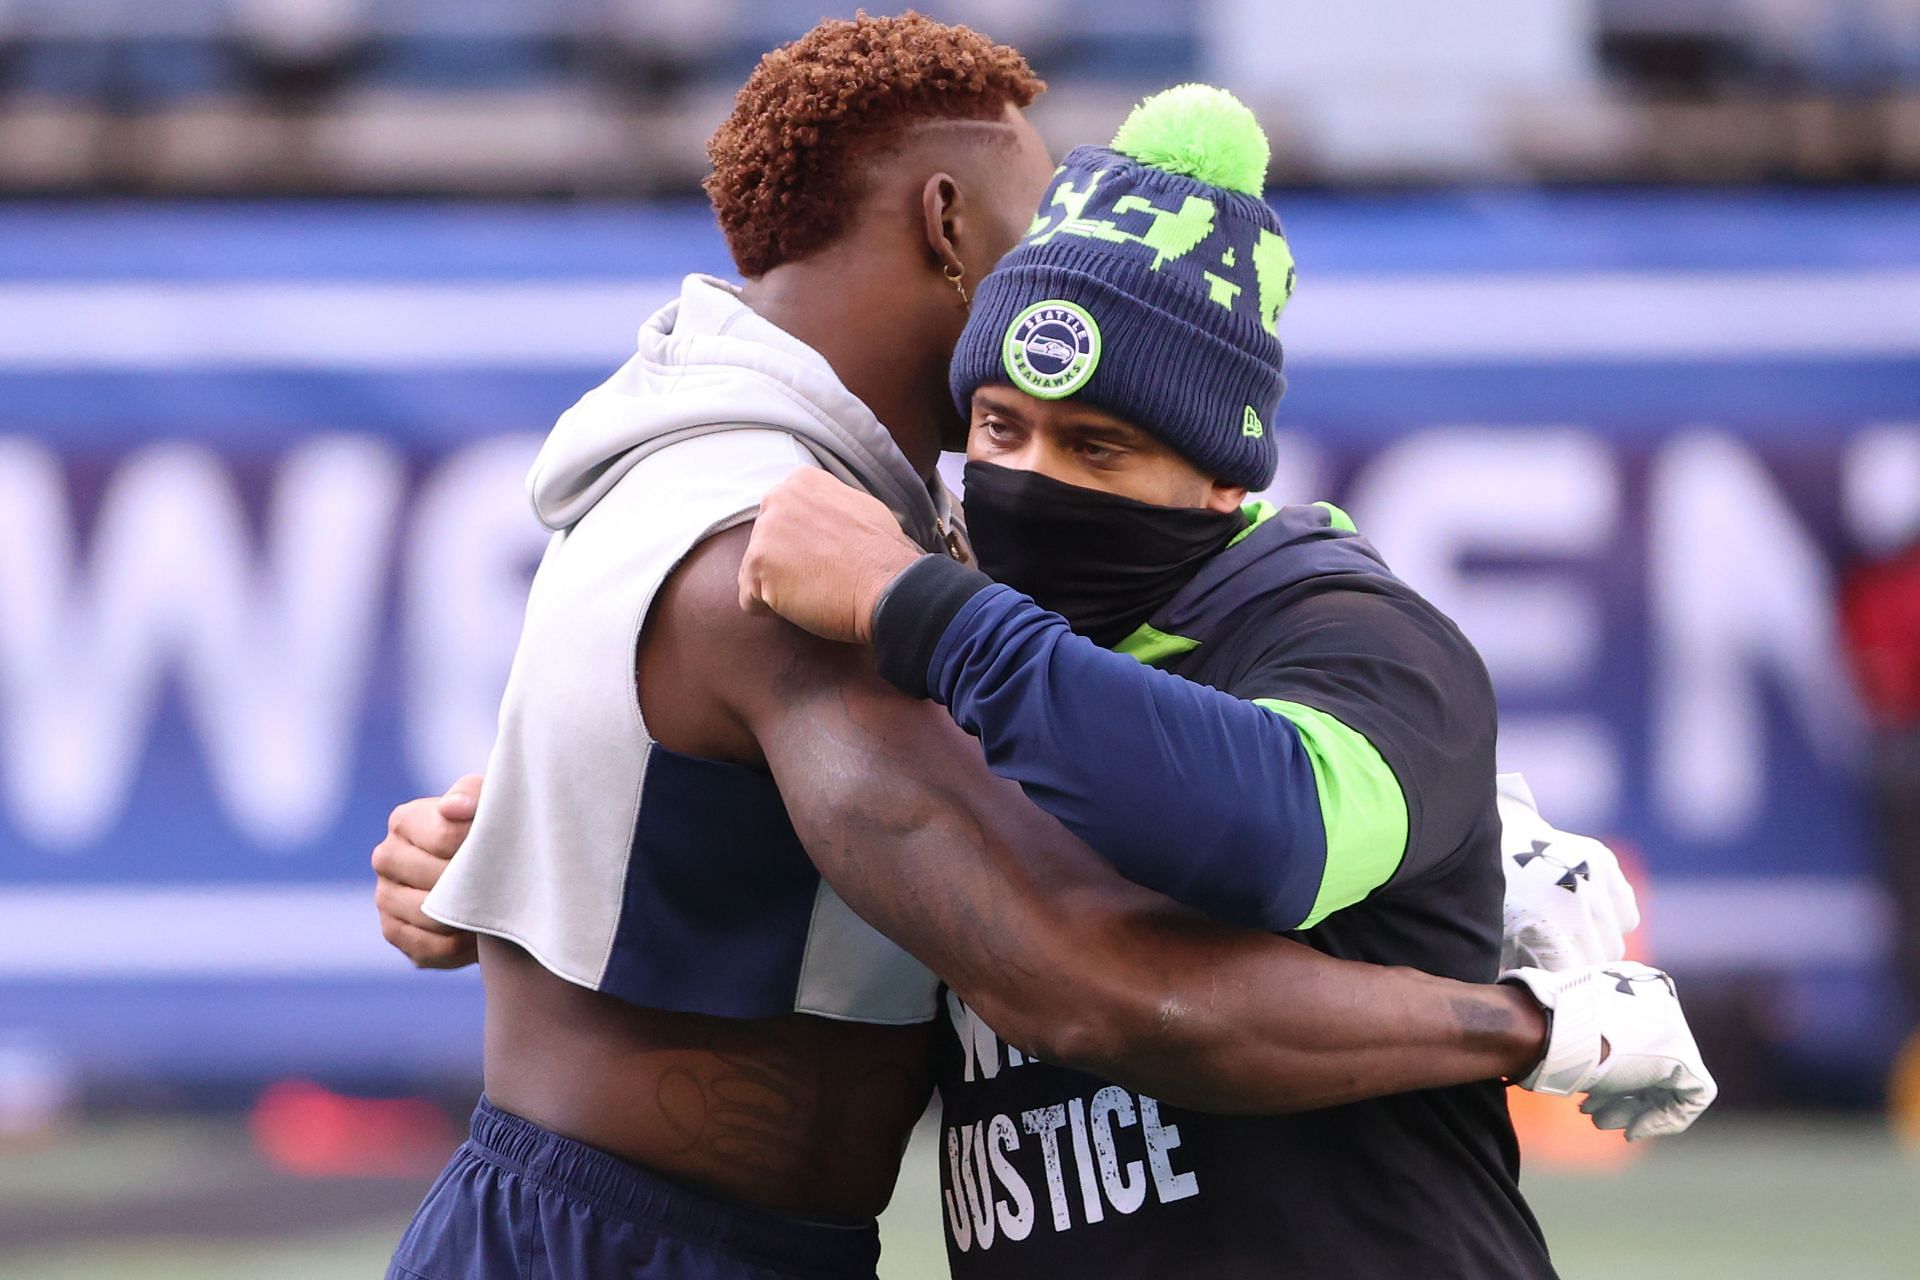 DK Metcalf stunned by Russell Wilson's departure from Seahawks